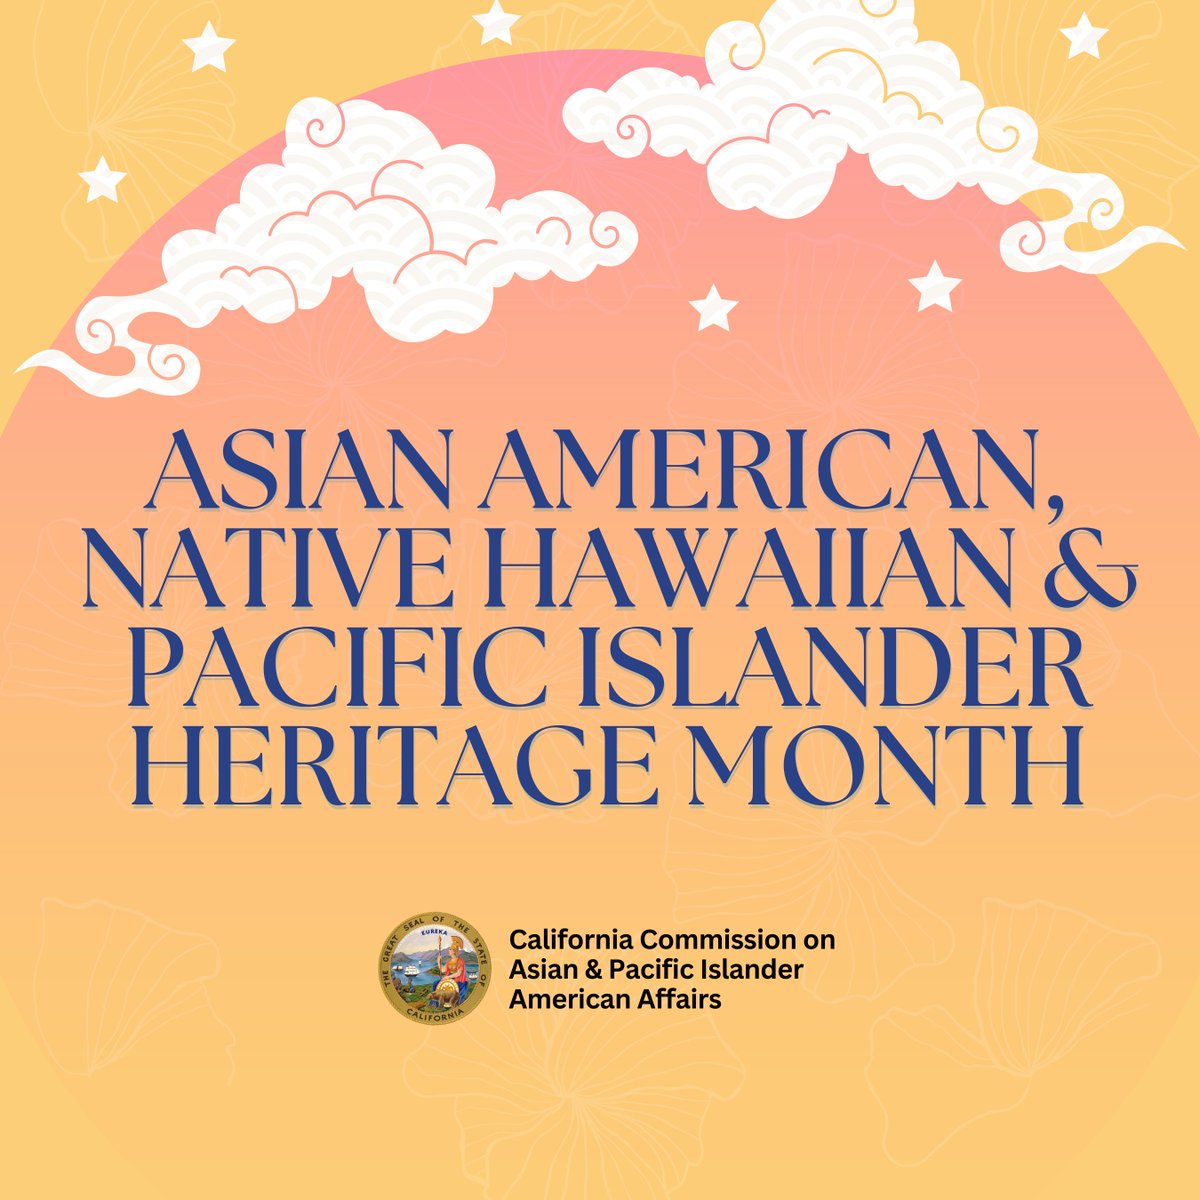 Celebrating heritage is more than just acknowledging diversity—it’s about cultivating inclusive environments where everyone is valued and respected. Let’s renew our commitment to safeguarding the rights and well-being of Asian Americans in California and beyond.